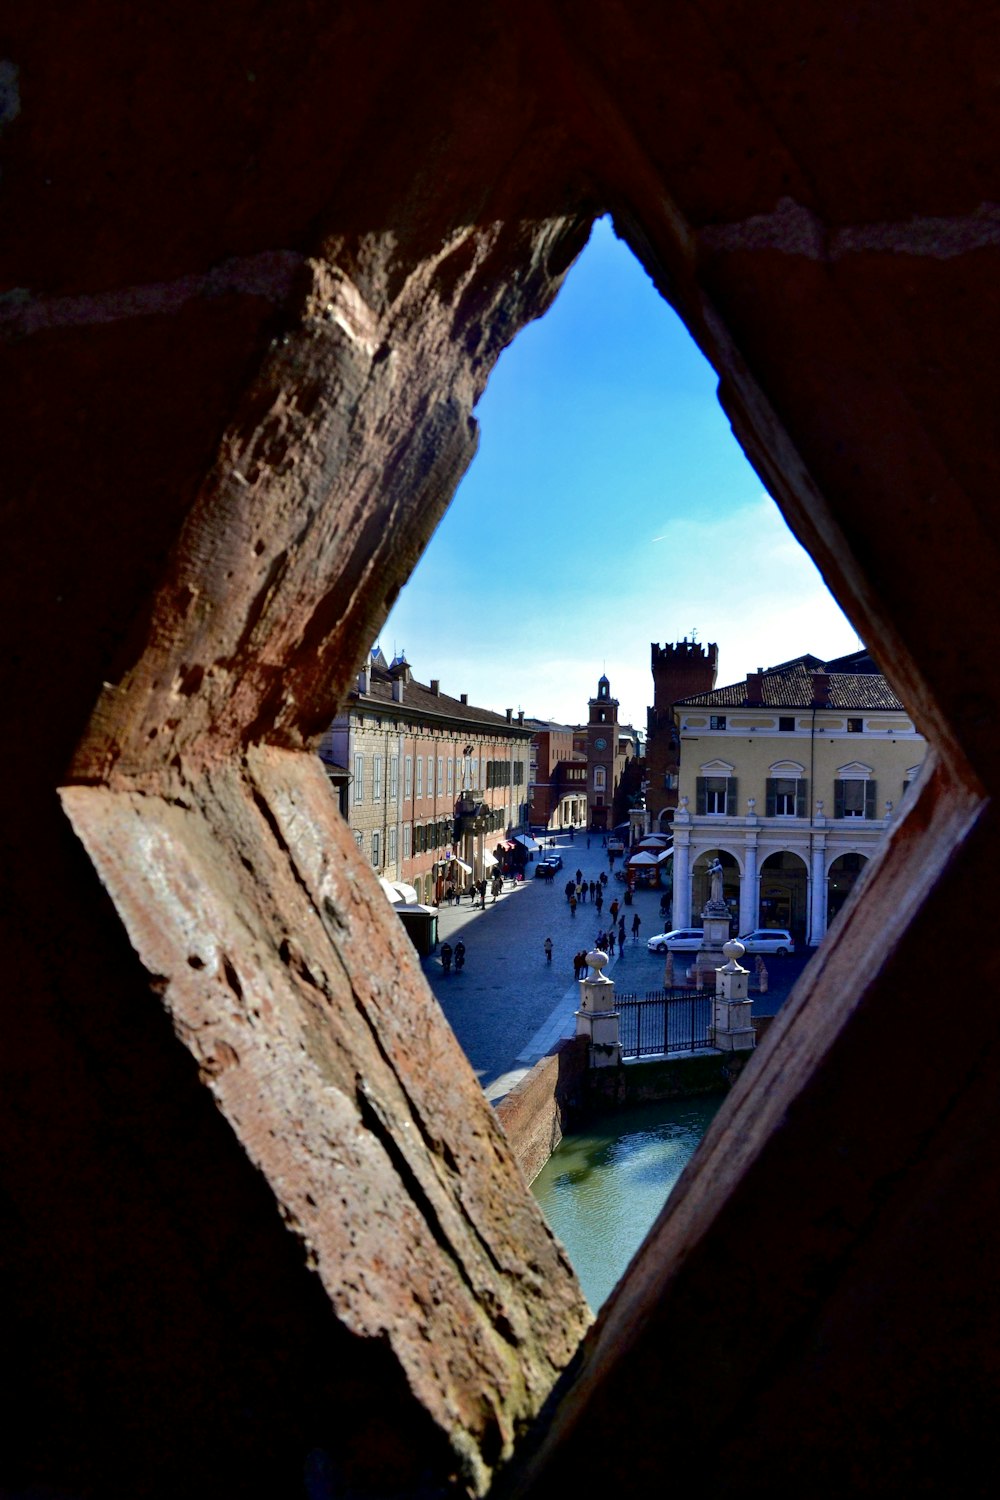 a view of a city through a hole in a wall